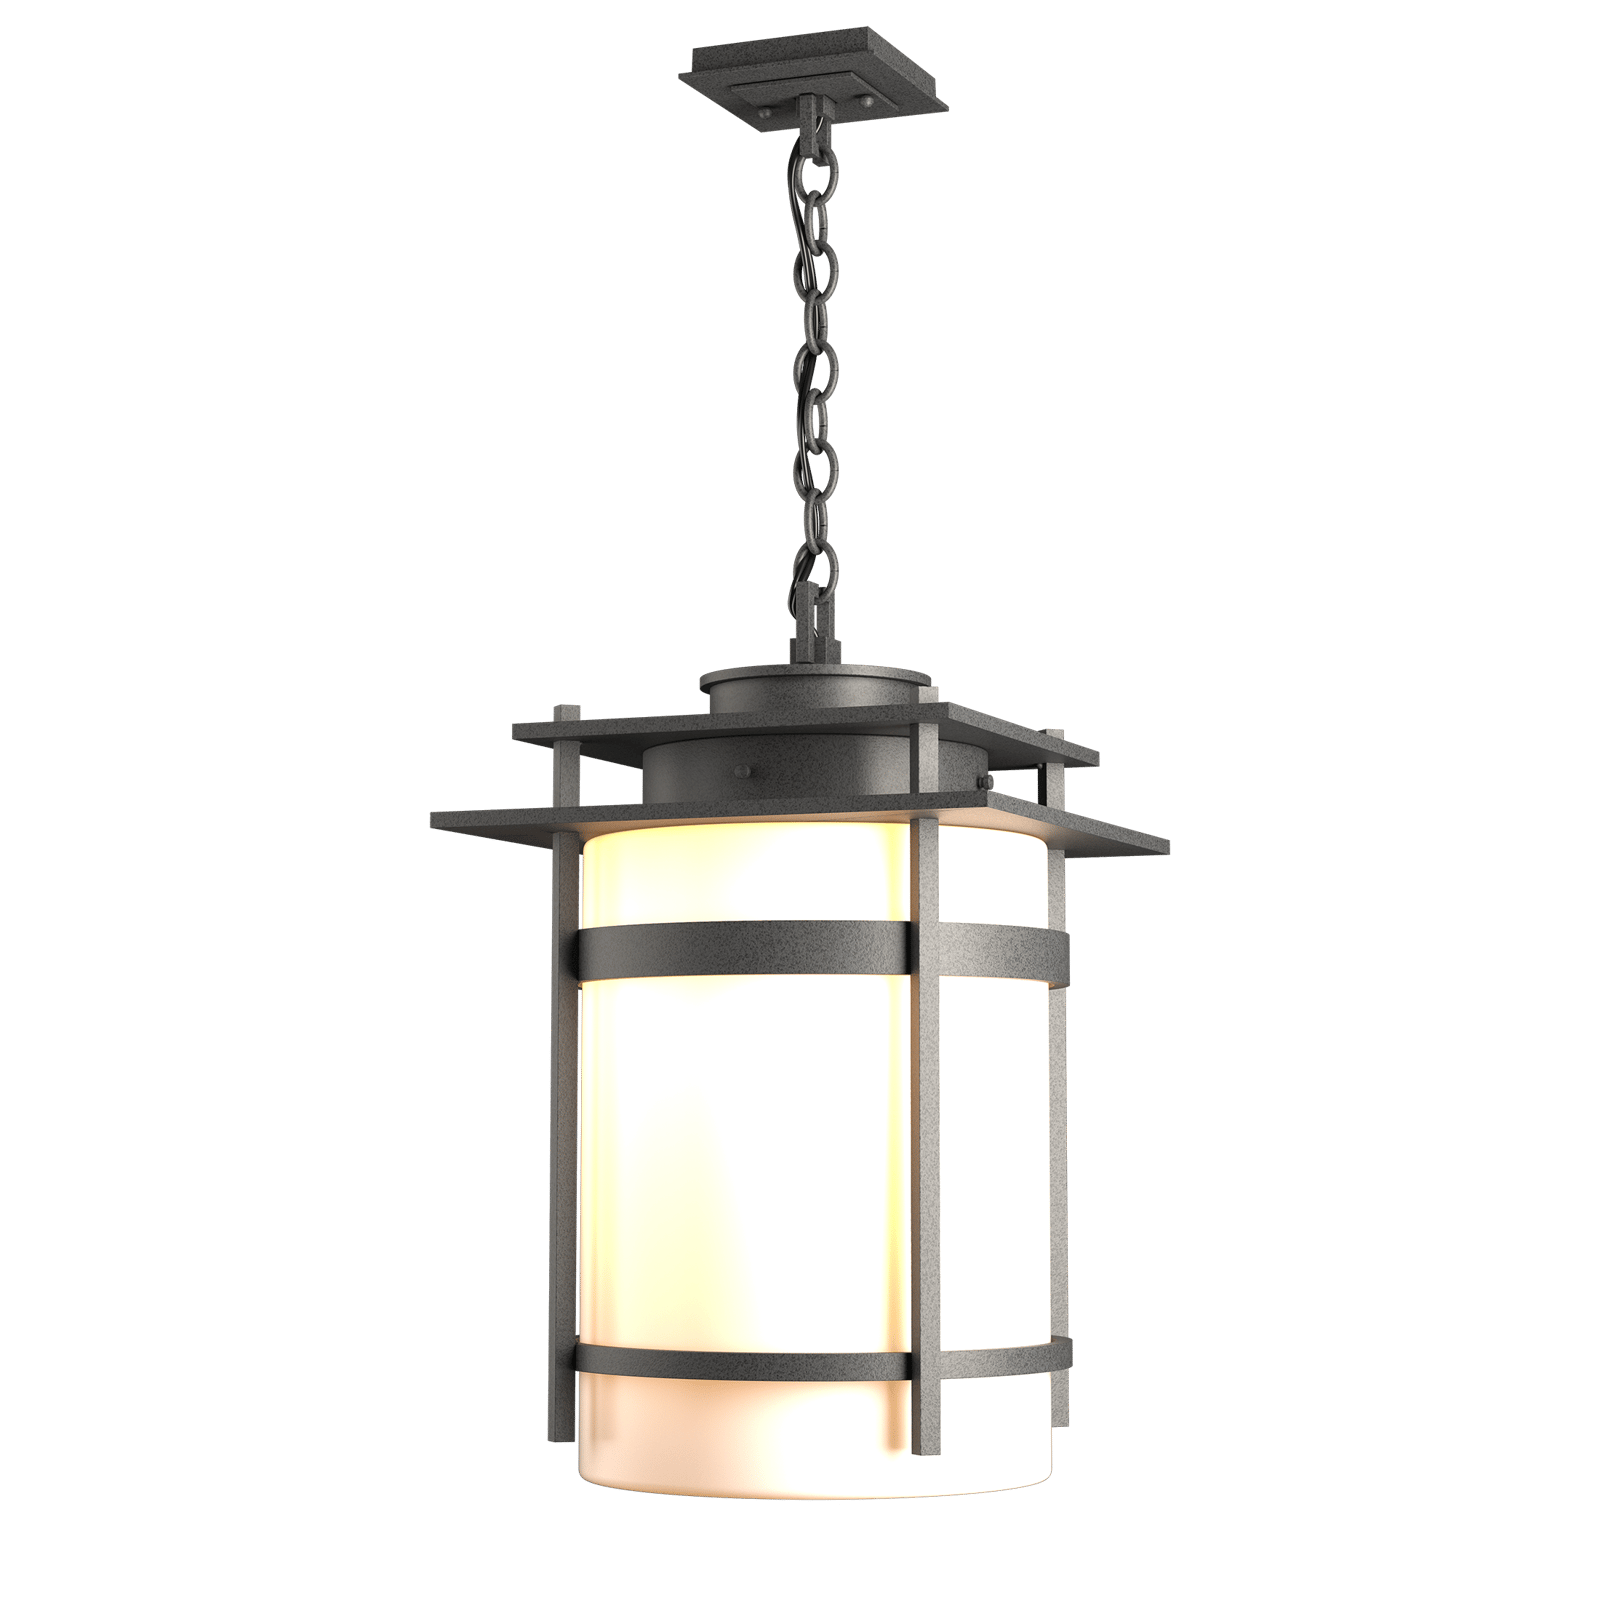 Hubbardton Forge Banded Large Outdoor Fixture Outdoor l Wall Hubbardton Forge Coastal Natural Iron Opal Glass (GG) 